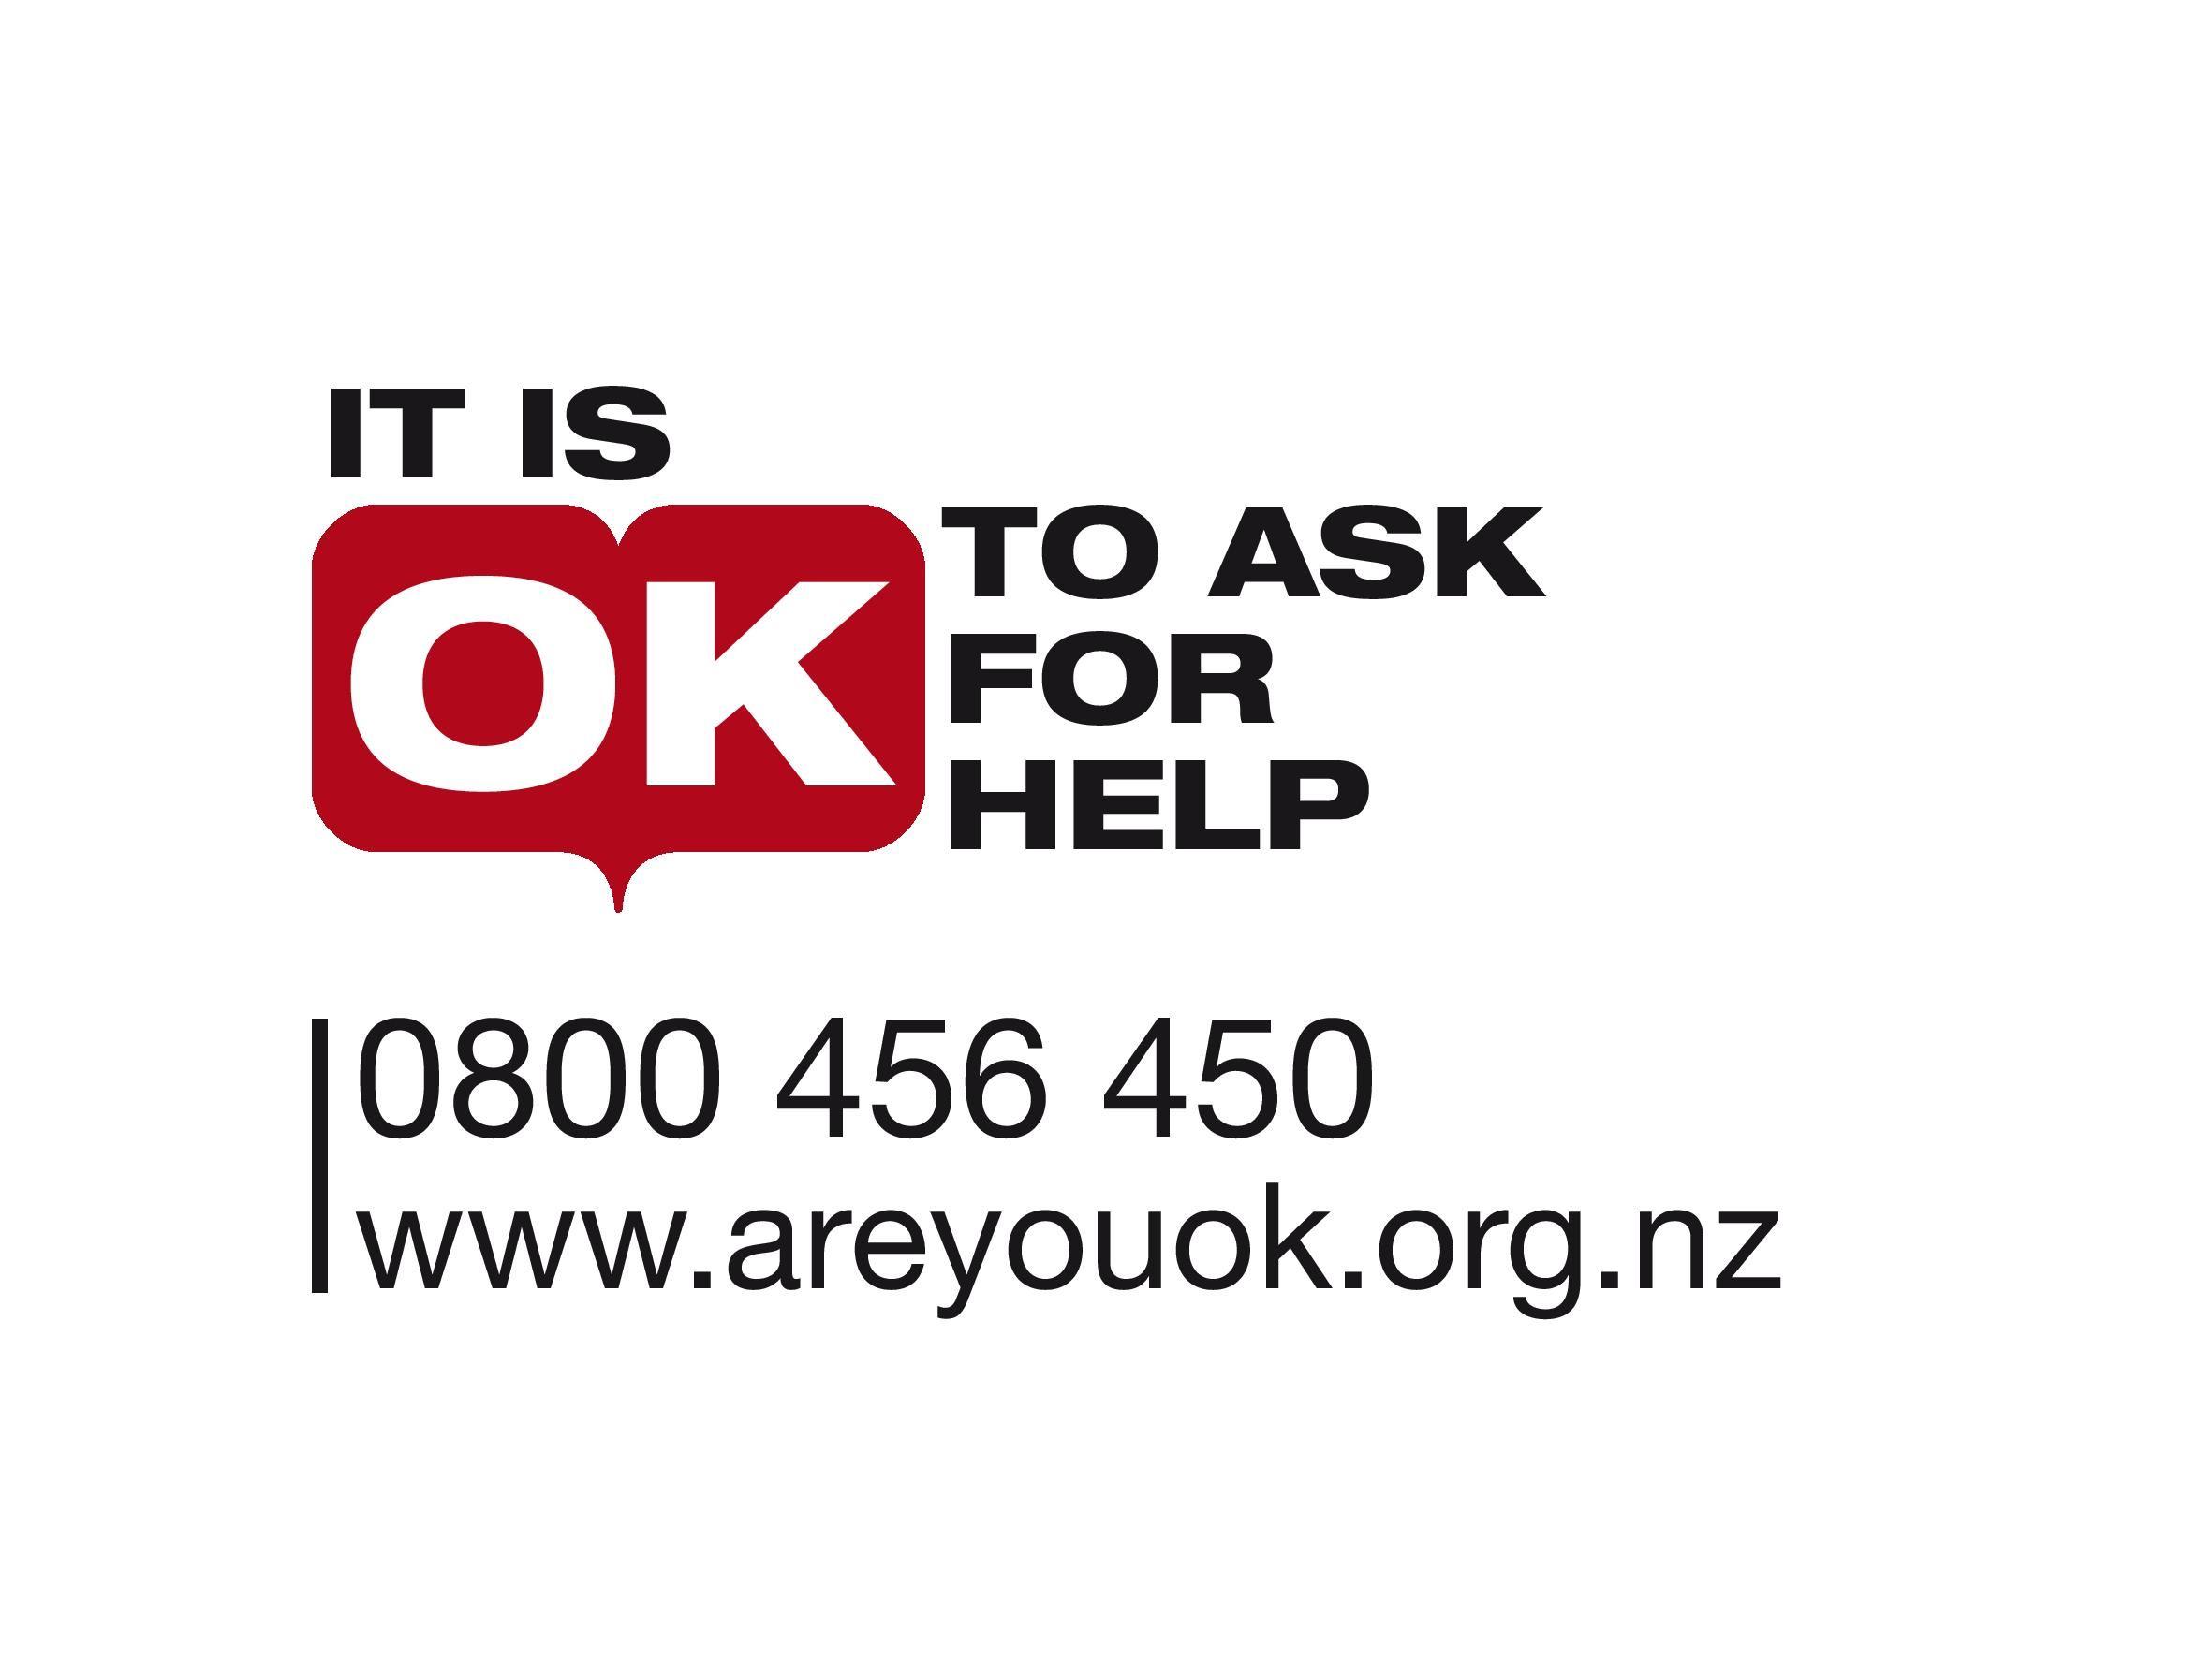 Ask Logo - It is OK to ask for help logo phone number. It's Not OK